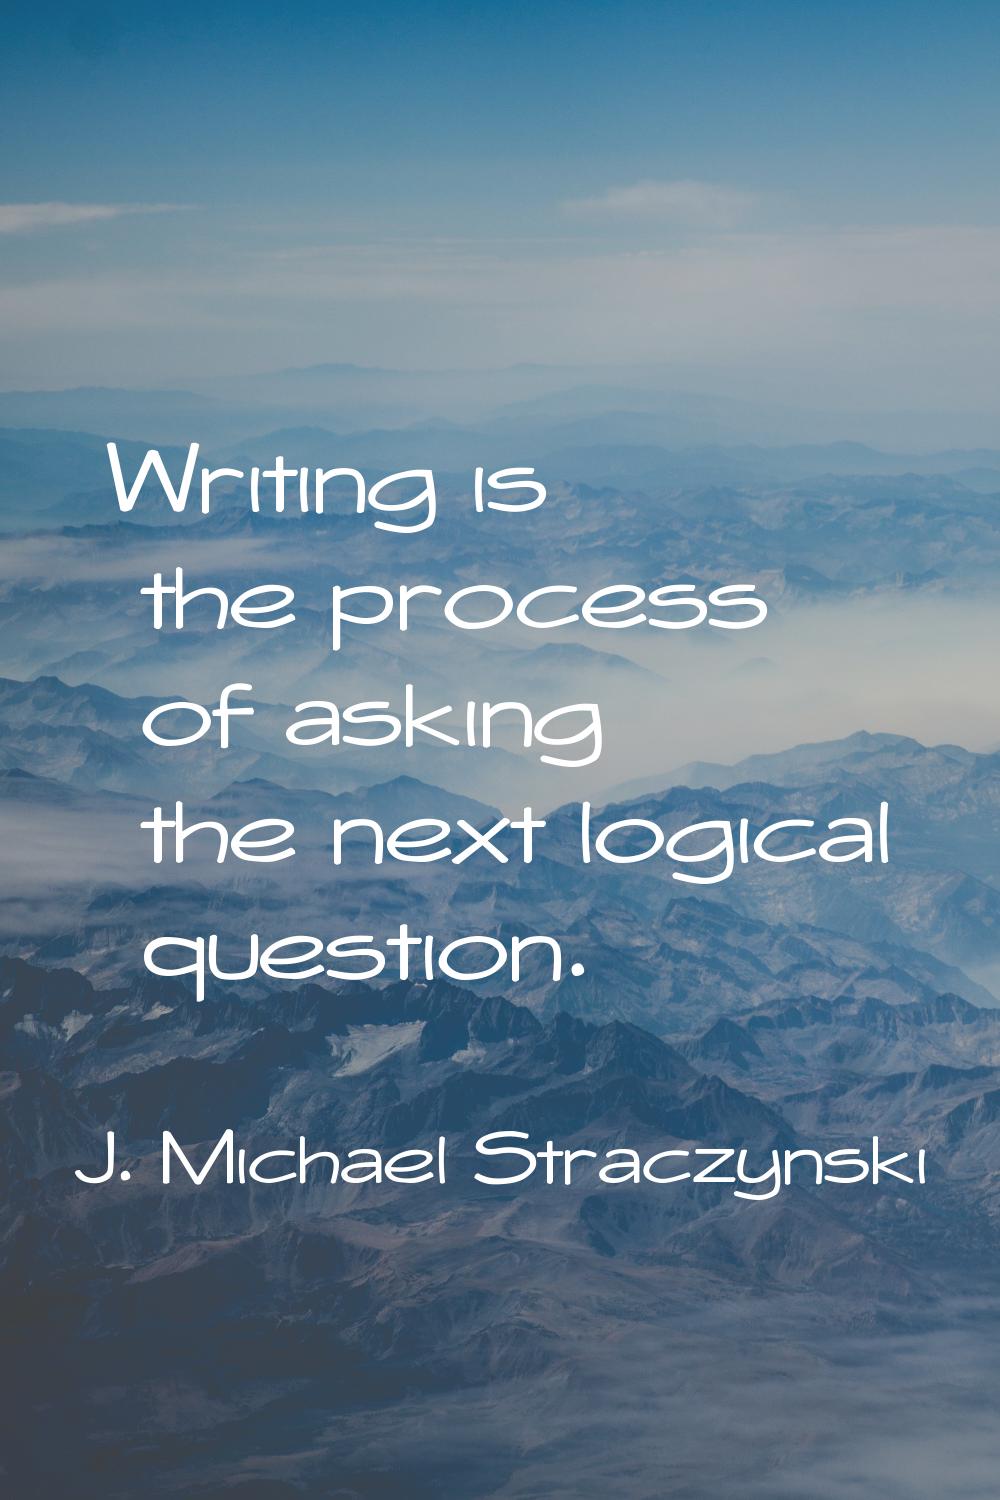 Writing is the process of asking the next logical question.